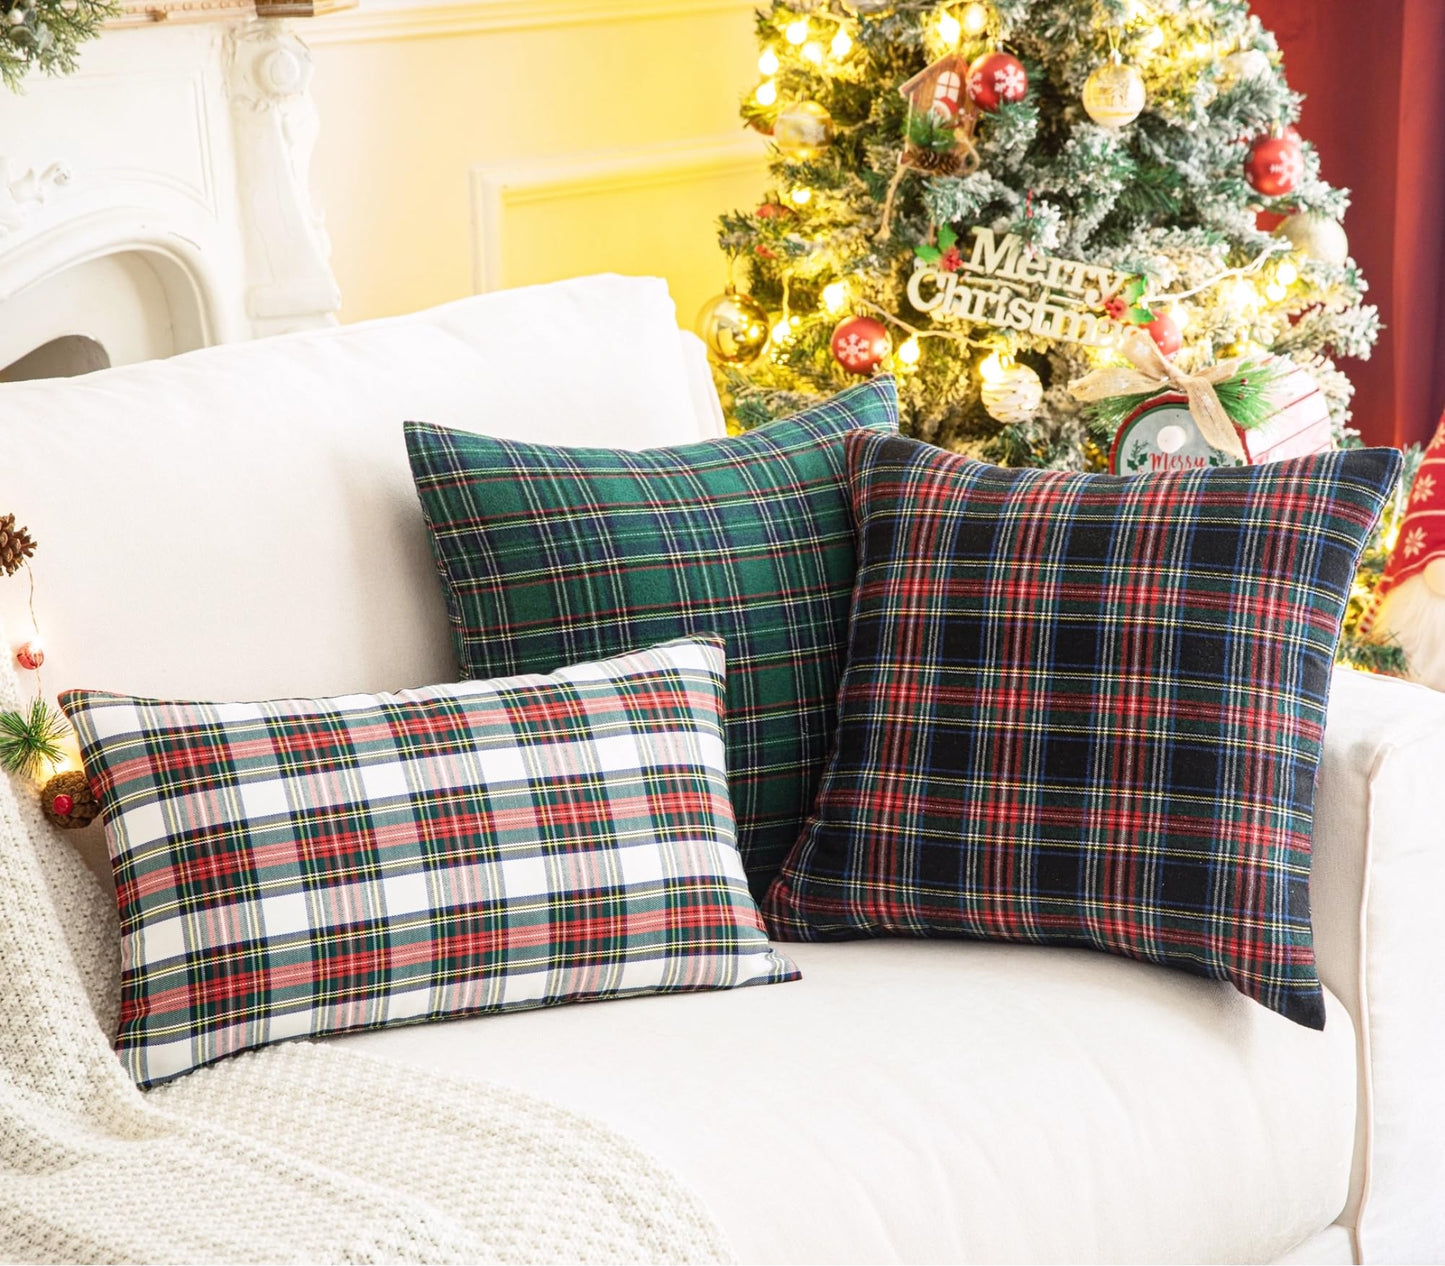 AQOTHES Pack of 2 Christmas Plaid Decorative Throw Pillow Covers Scottish Tartan Cushion Case for Farmhouse Home Holiday Decor Red and Black, 18 x 18 Inches